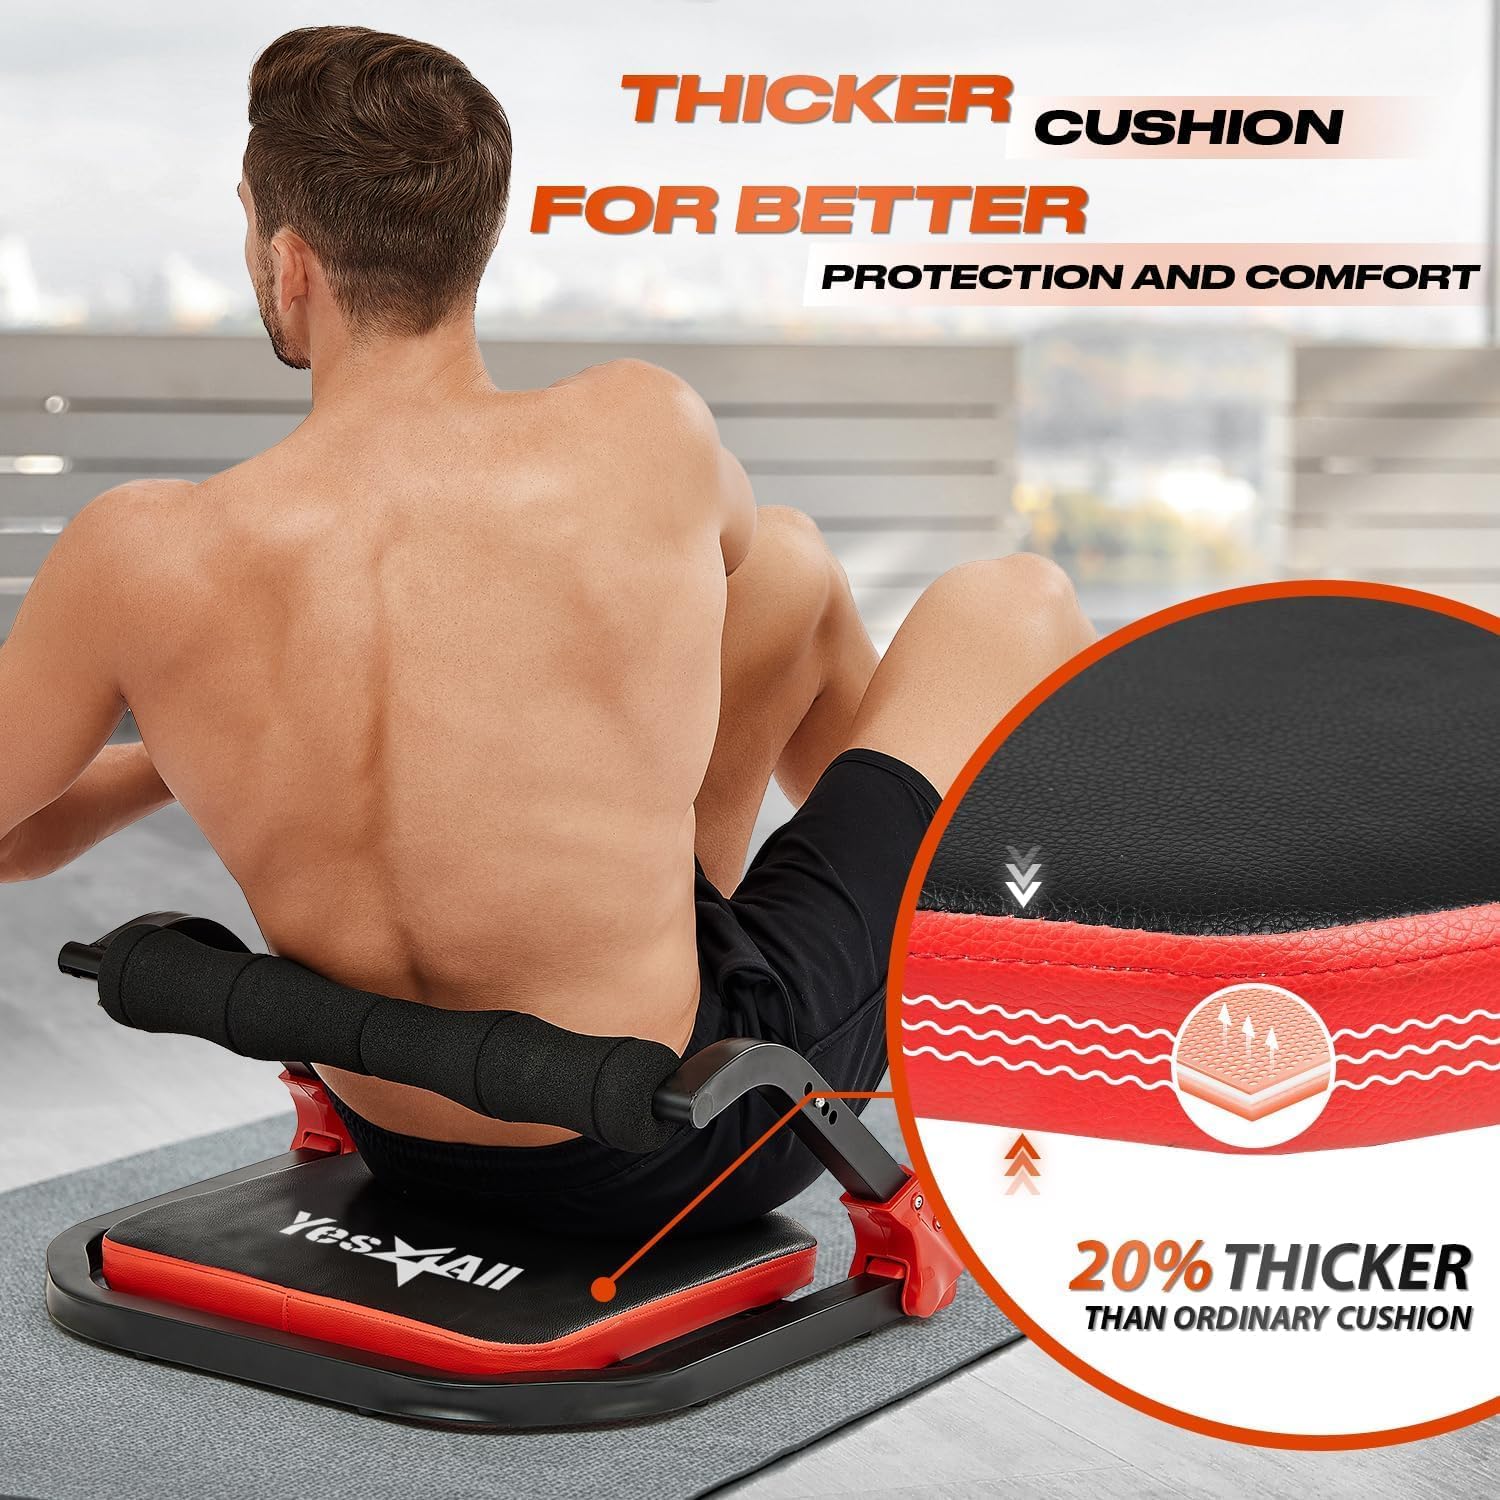 Yes4All Ab Crunch Machine For Total Body & Core Abdominal, Situp Lockable With Ergonomic Foam Handle & 2 Resistance Bands